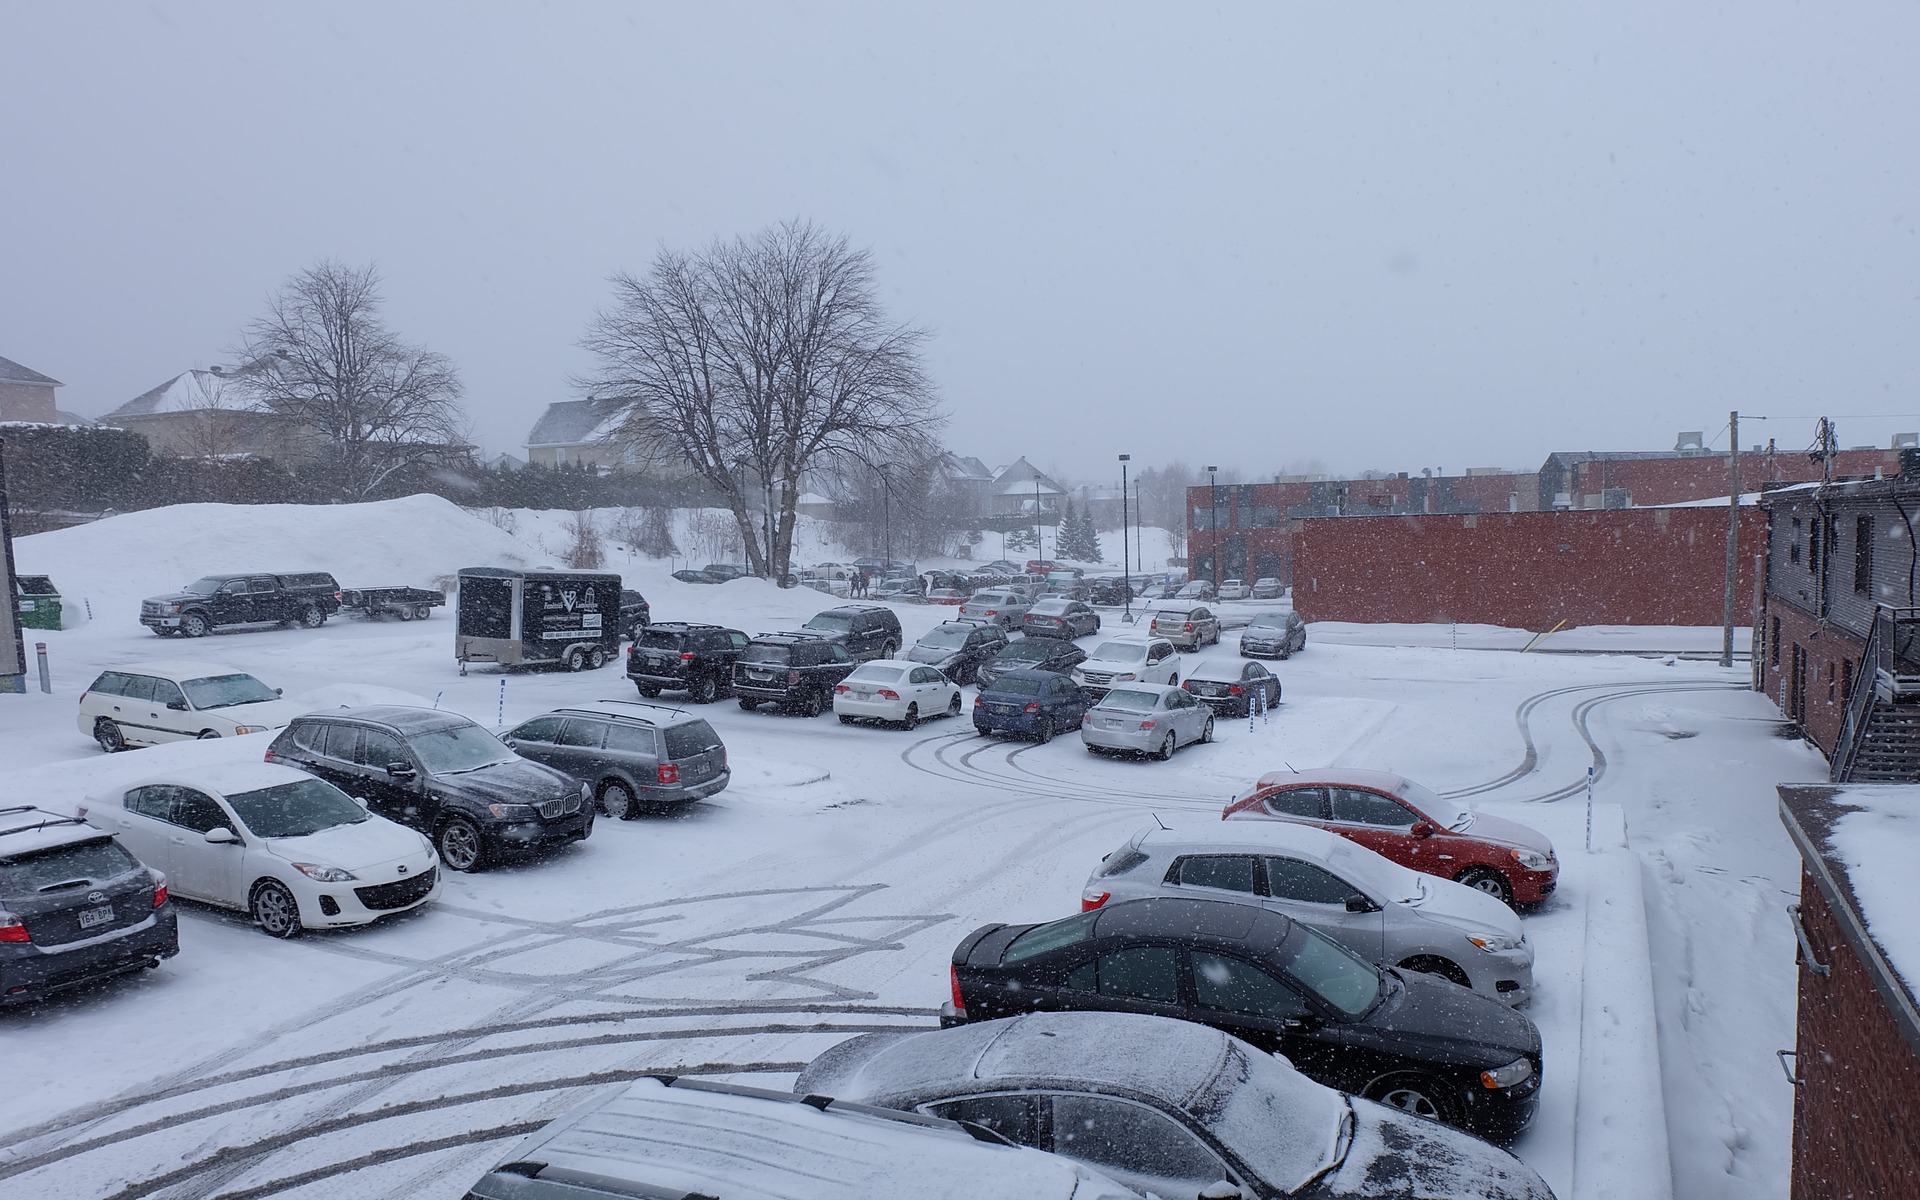 This is what our office parking looks like. It's Spring, right?